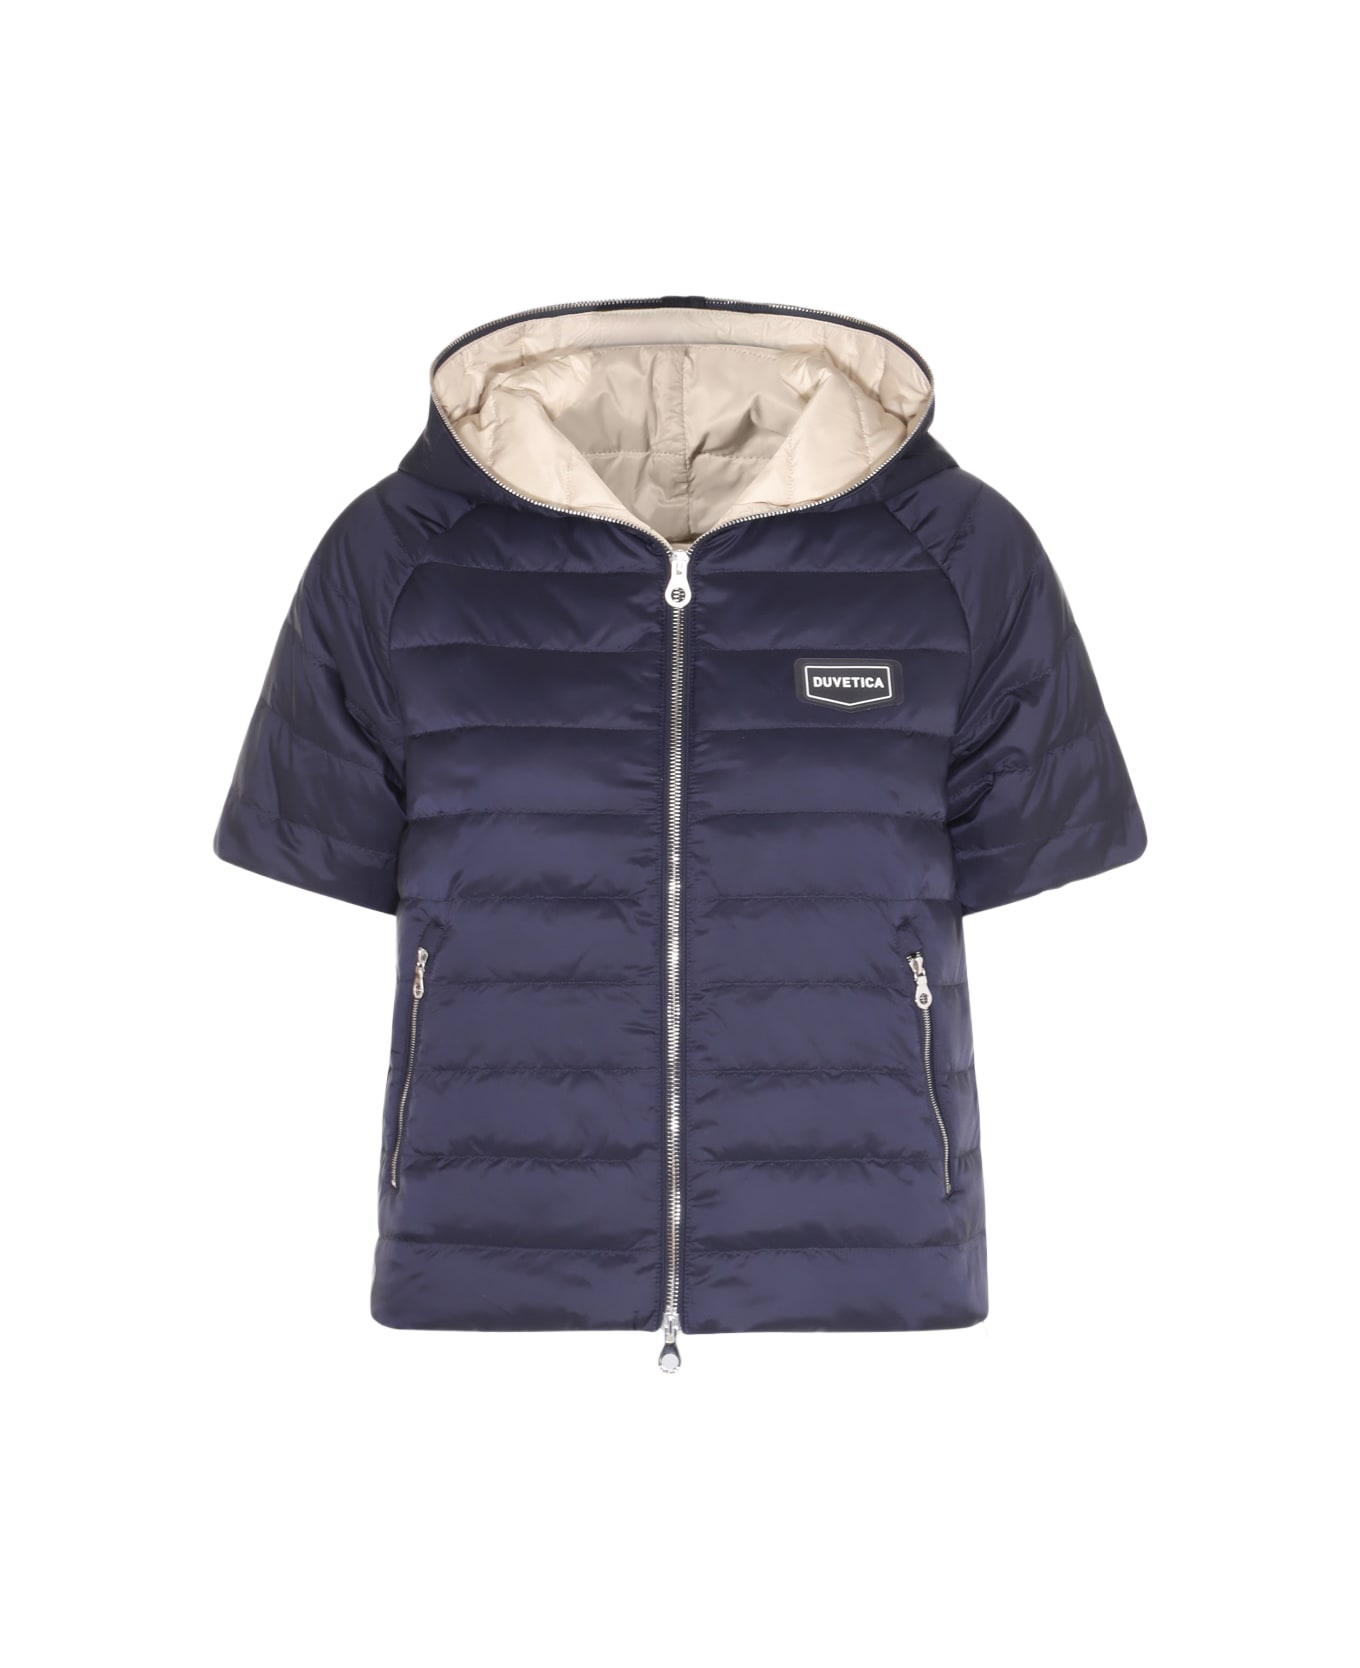 Duvetica Navy Blue And Beige Down Jacket - Blue